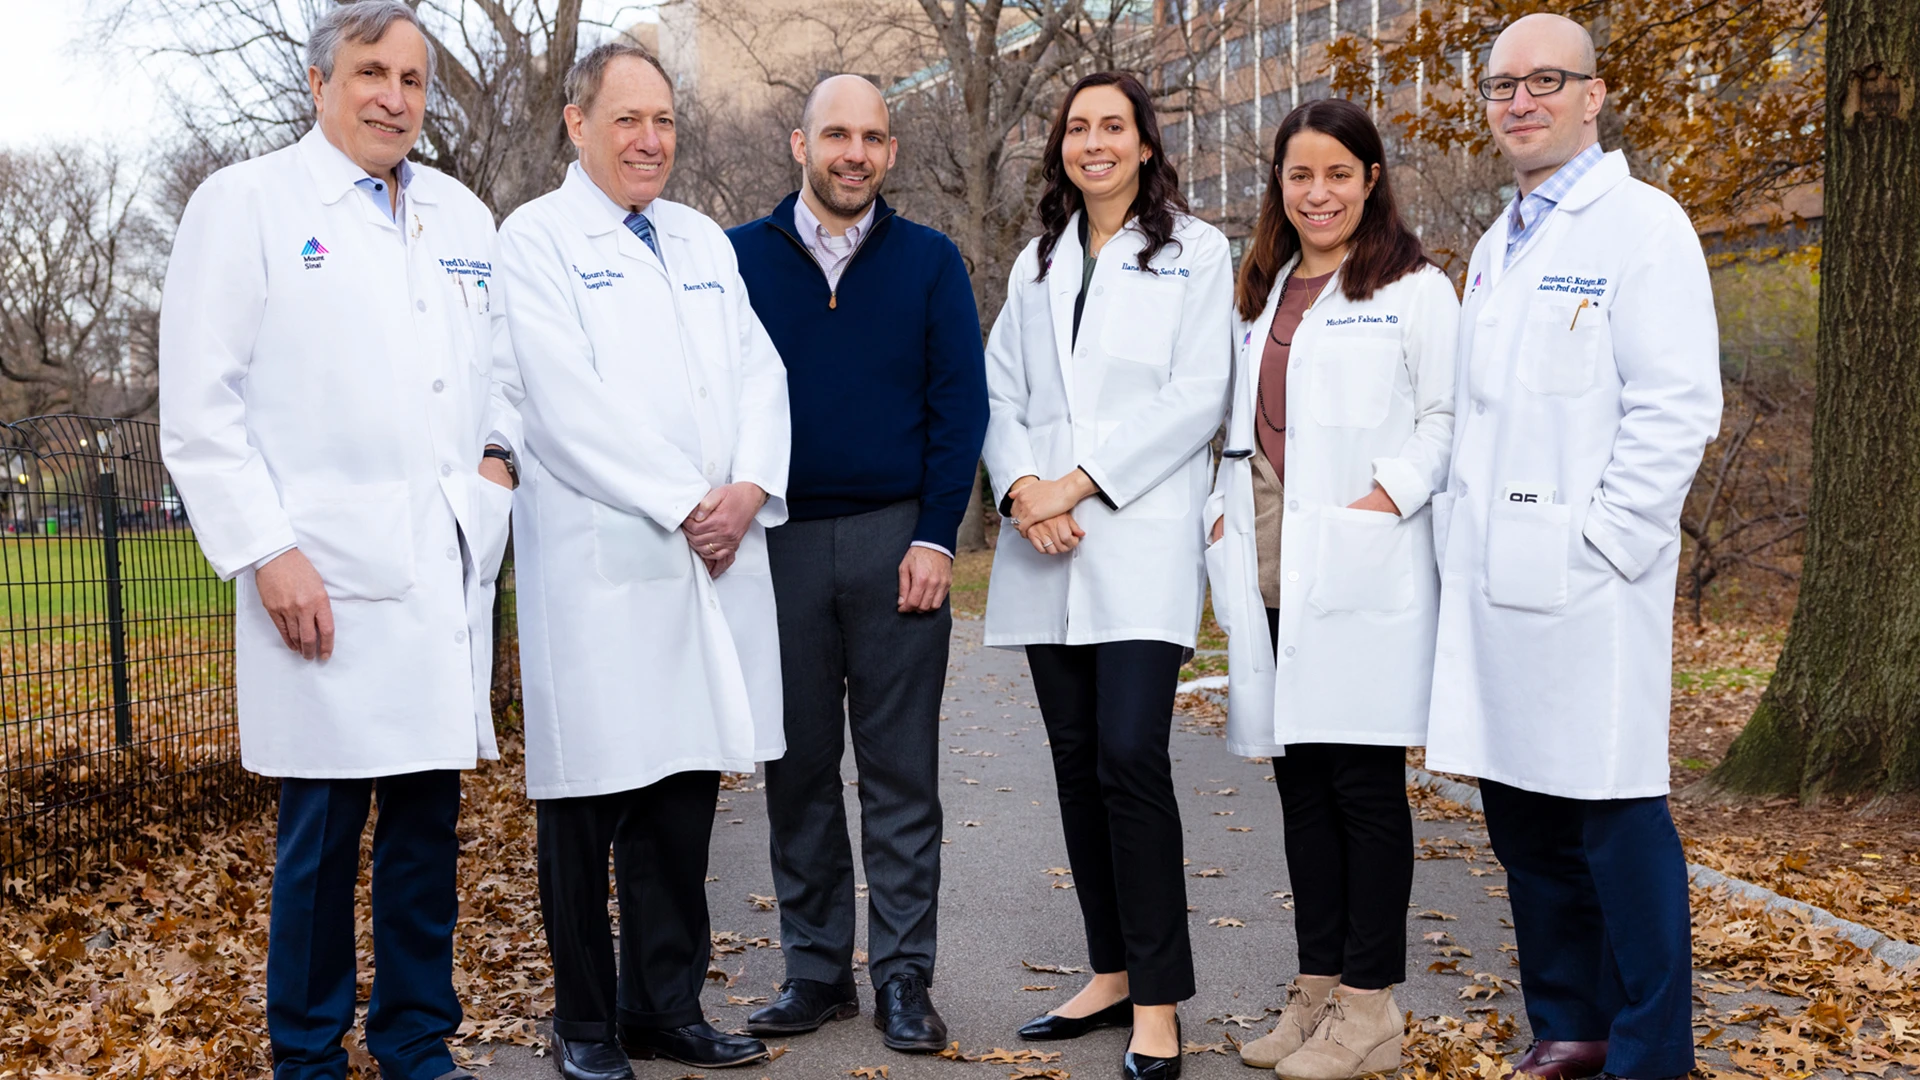 Mount Sinai's multiple sclerosis clinicians and researchers include, from left: Fred Lublin, MD; Aaron Miller, MD; James Sumowski, PhD; Ilana B. Katz Sand, MD; Michelle Fabian, MD; and Stephen Krieger, MD 